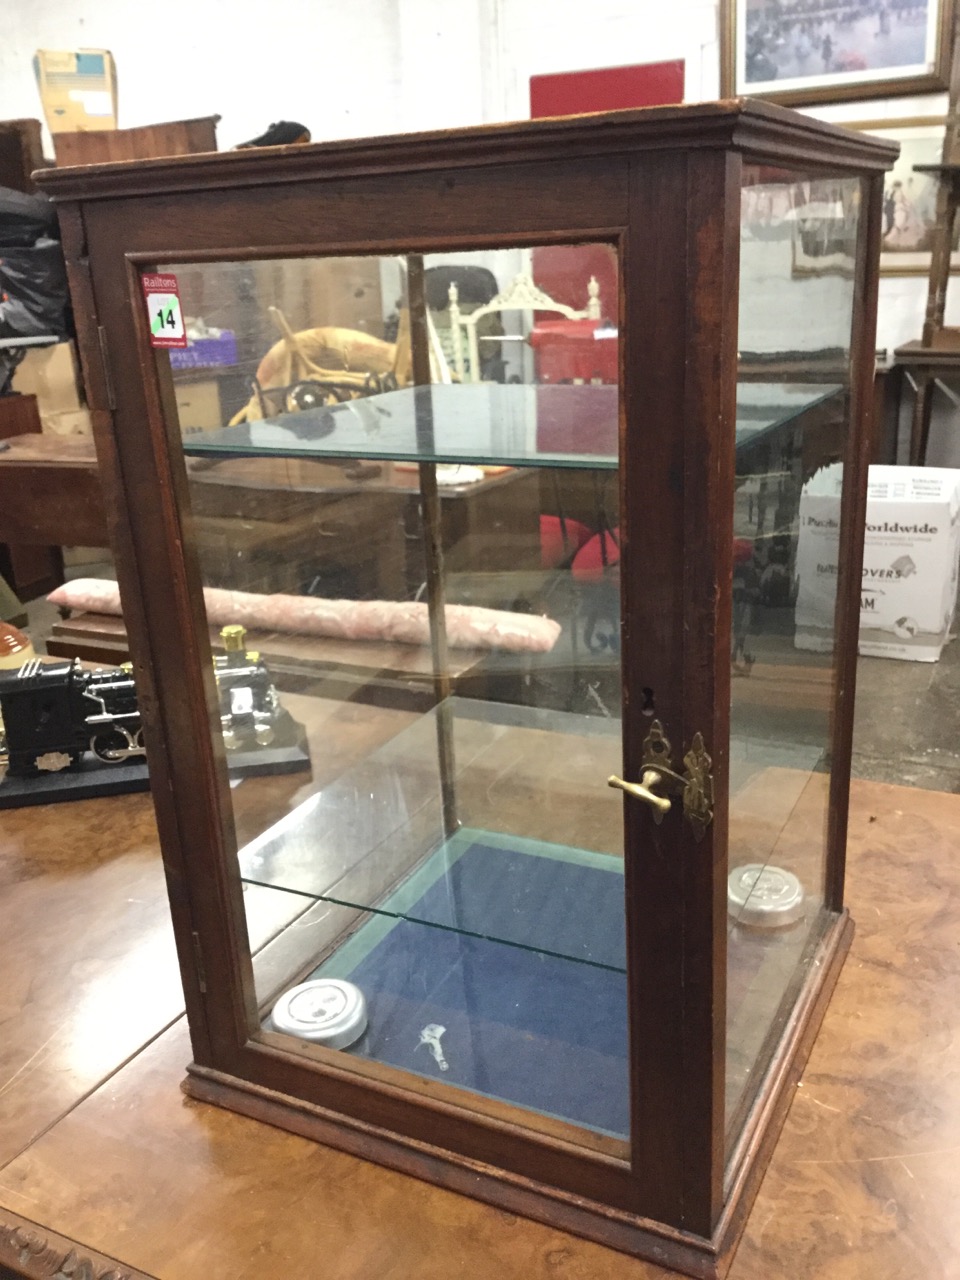 A square Edwardian mahogany counter-top glazed display cabinet, the front with rounded column